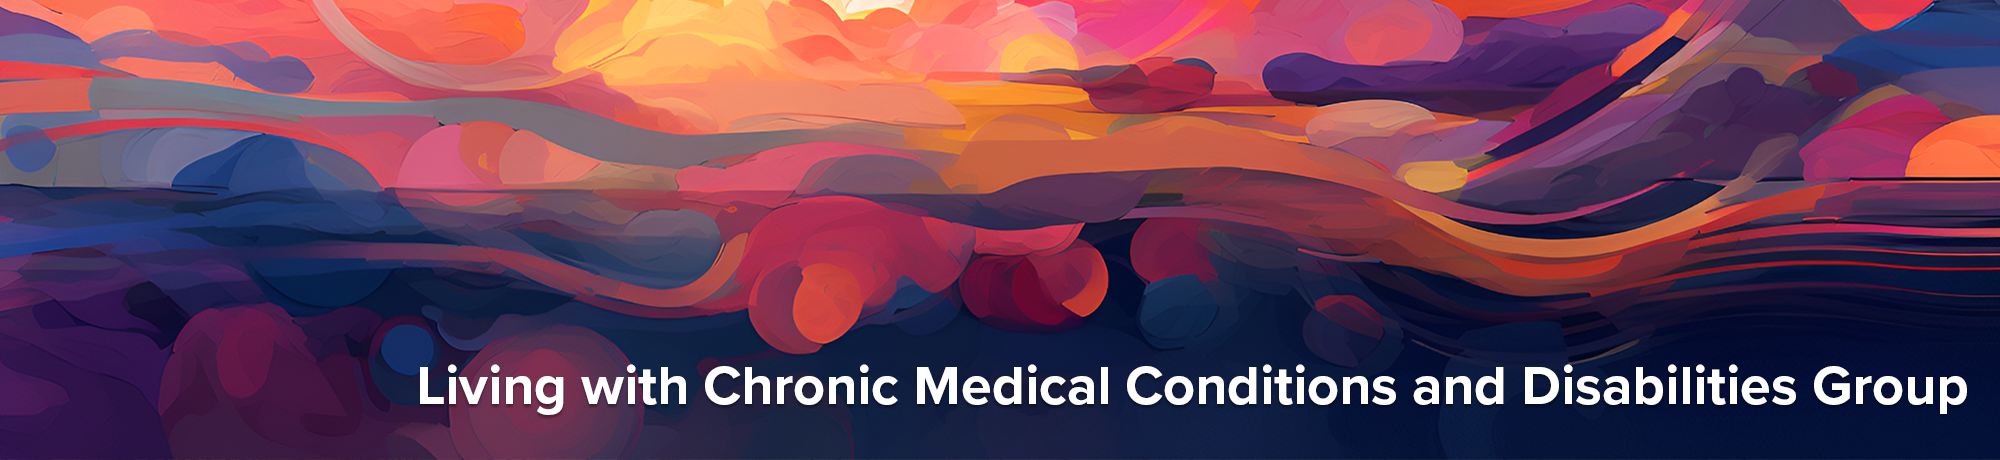 Living with Chronic Medical Conditions and Disabilities Group Banner